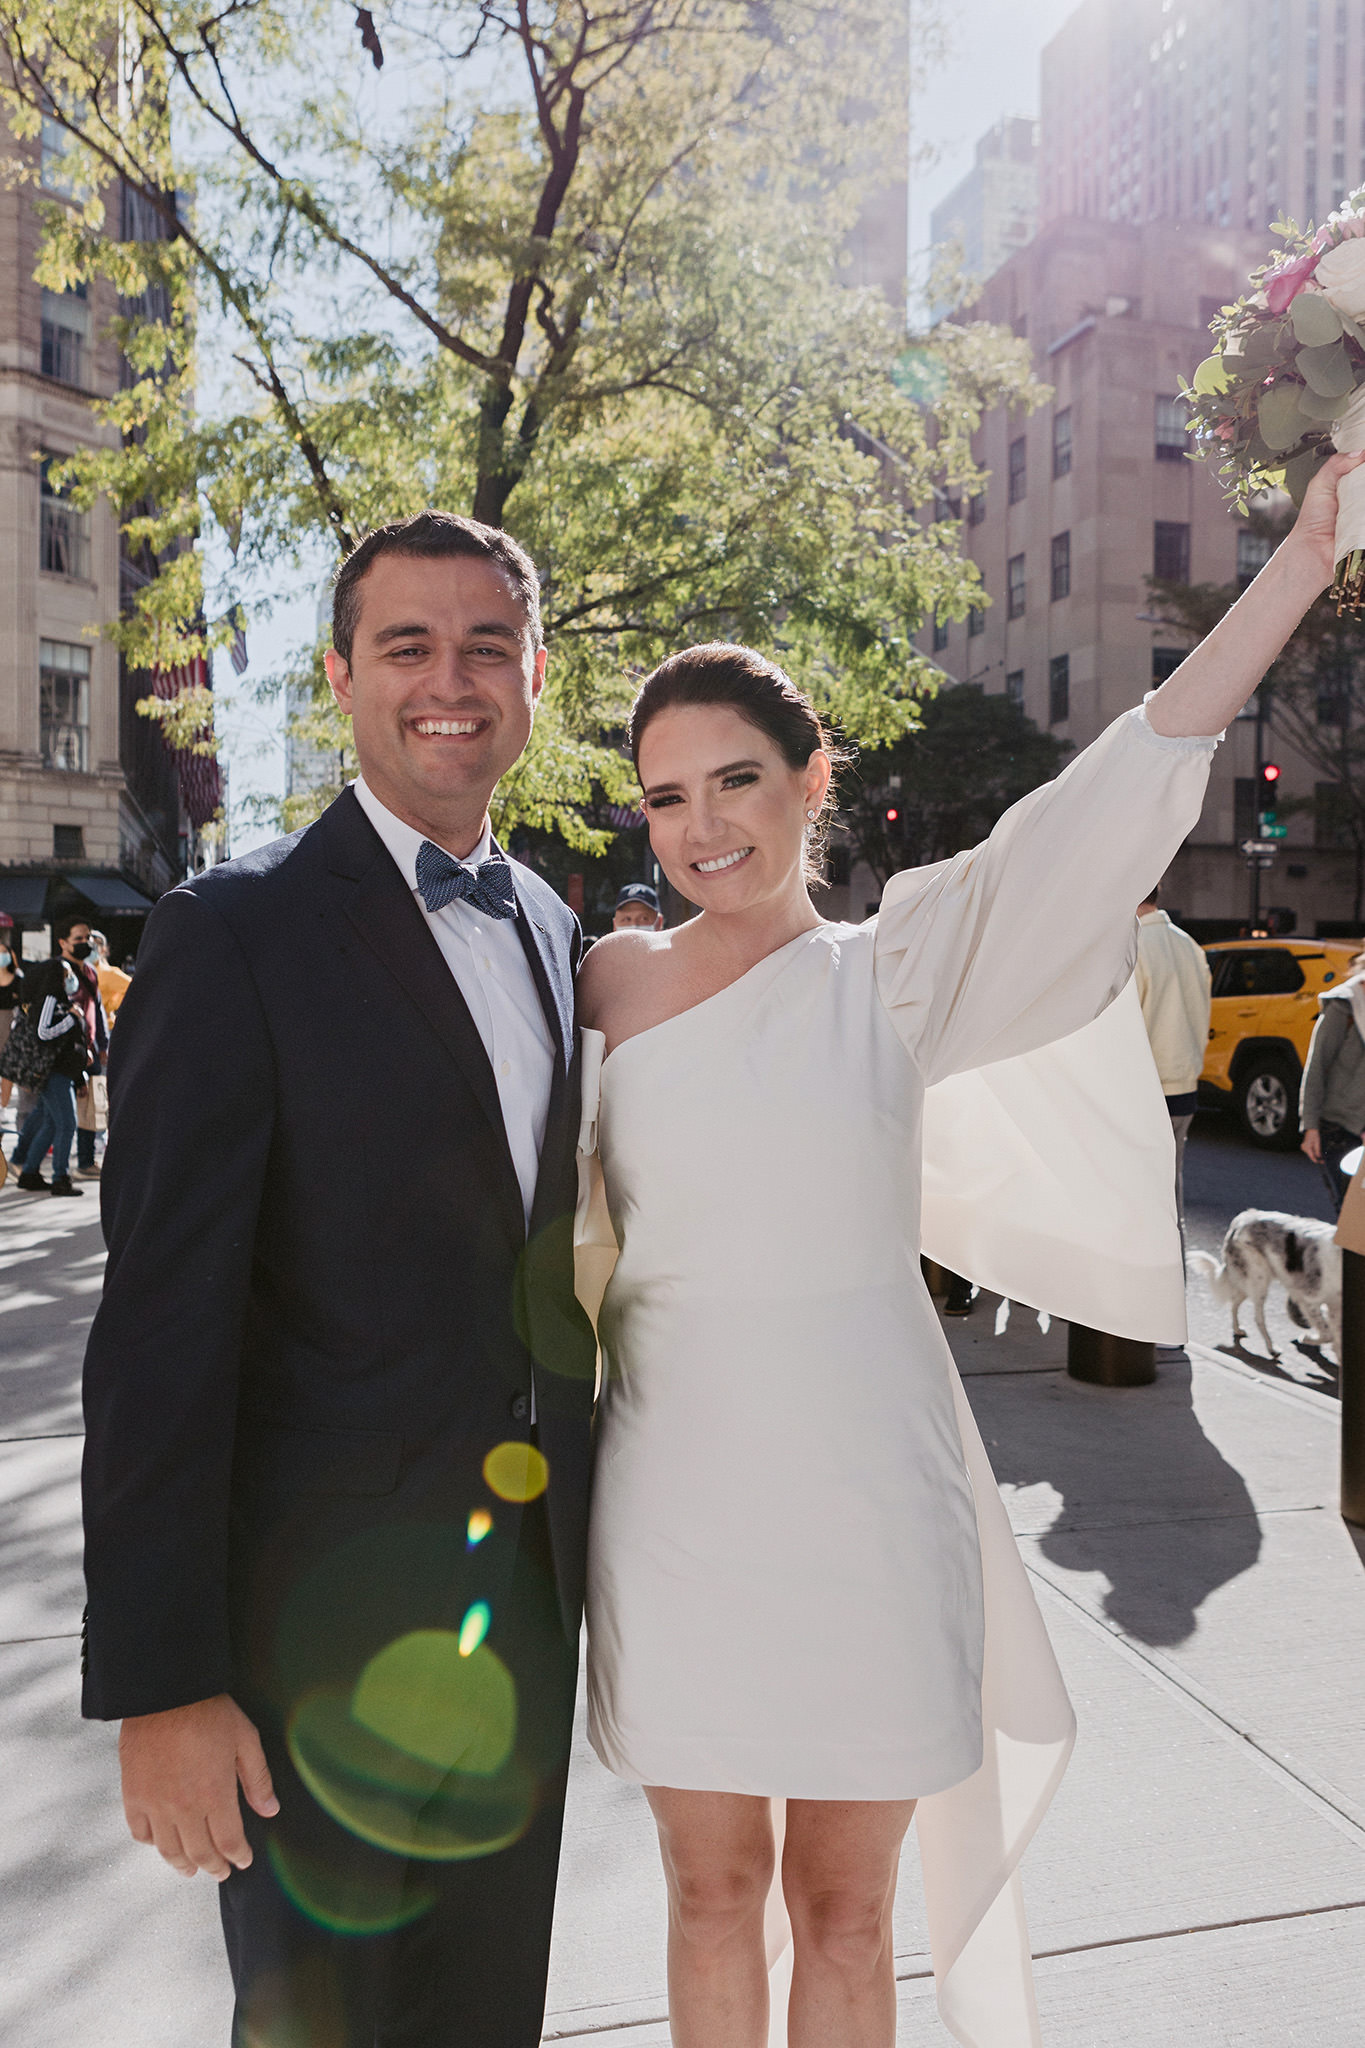 Newlyweds excited and happy after a beautiful ceremony at St. Patrick's cathedral in NYC